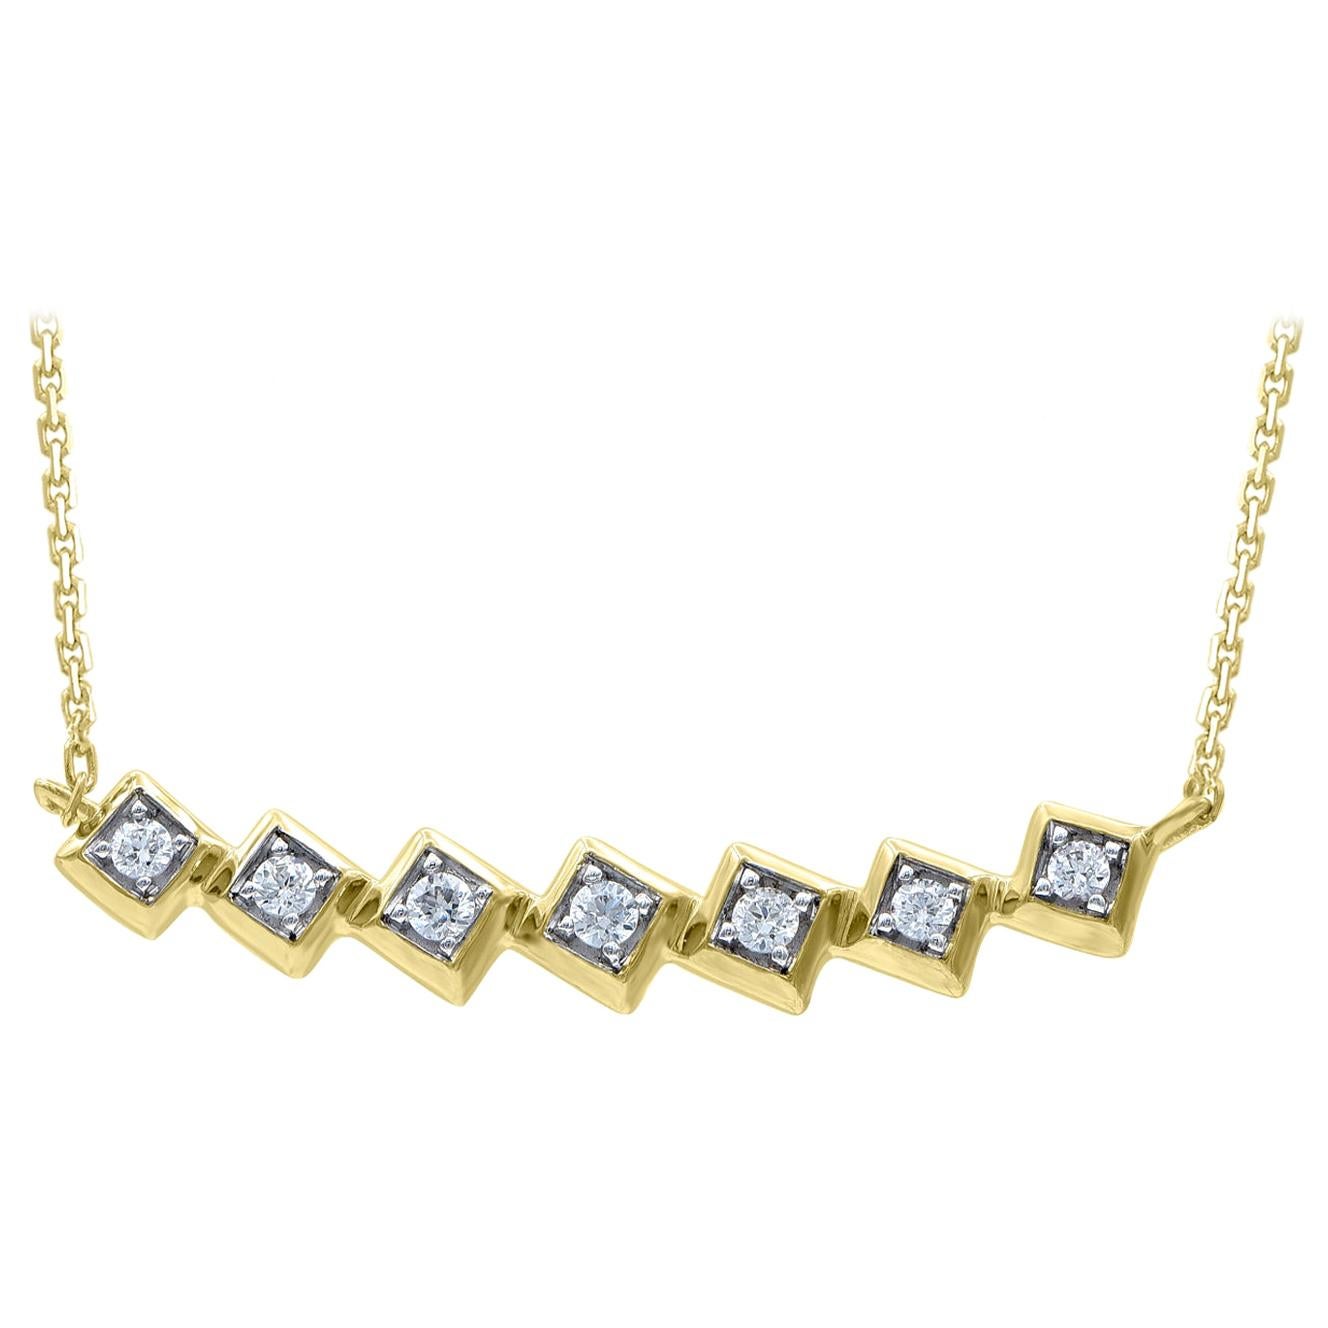 TJD 0.15 Carat Round Diamond 14 Kt Yellow Gold Square Textured Fashion Necklace